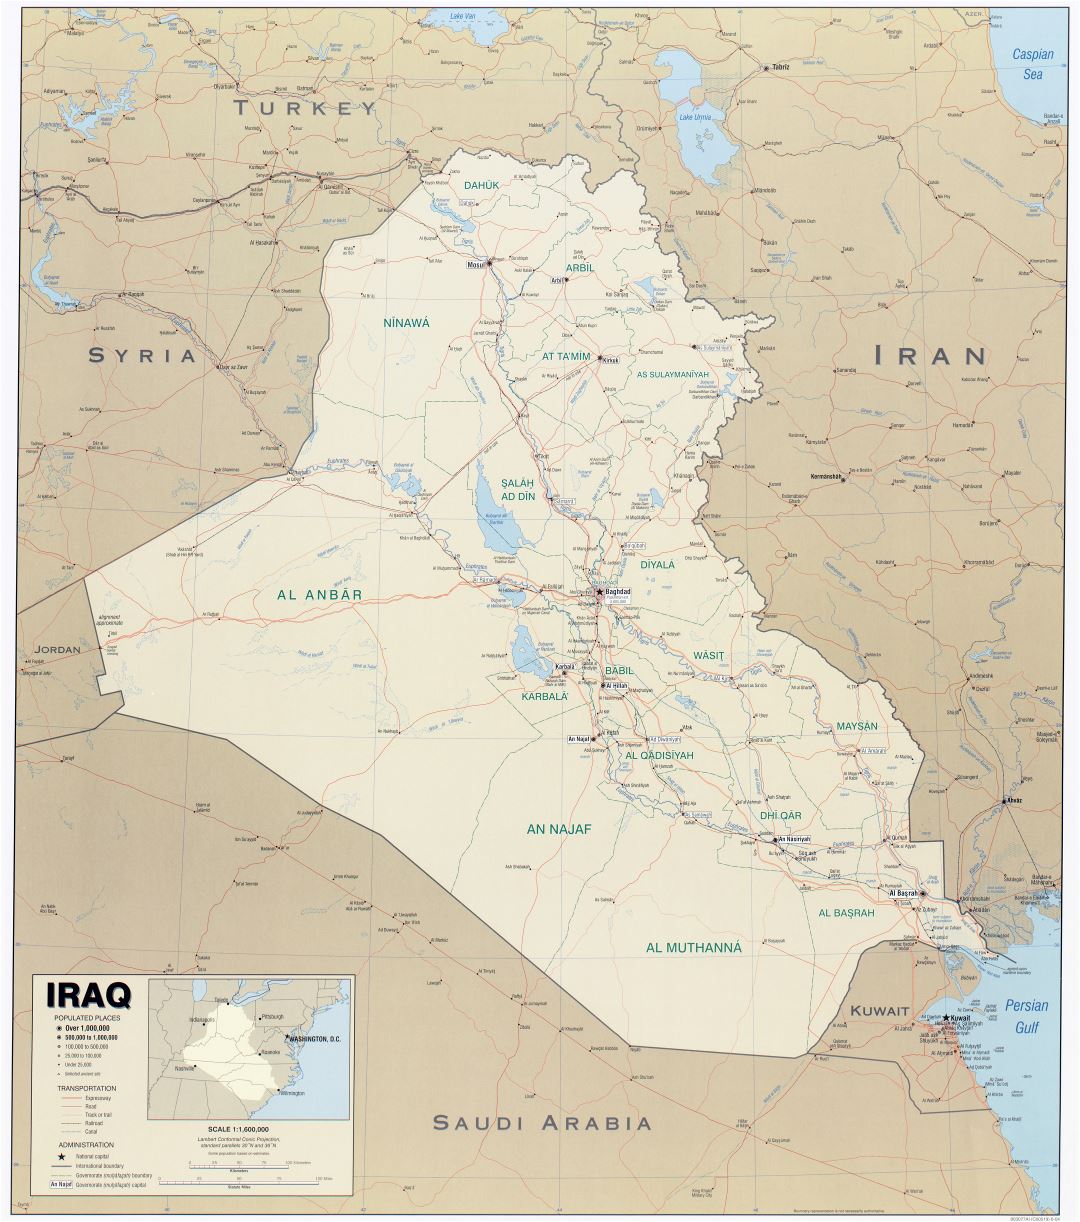 Large scale political map of Iraq with other marks - 2004